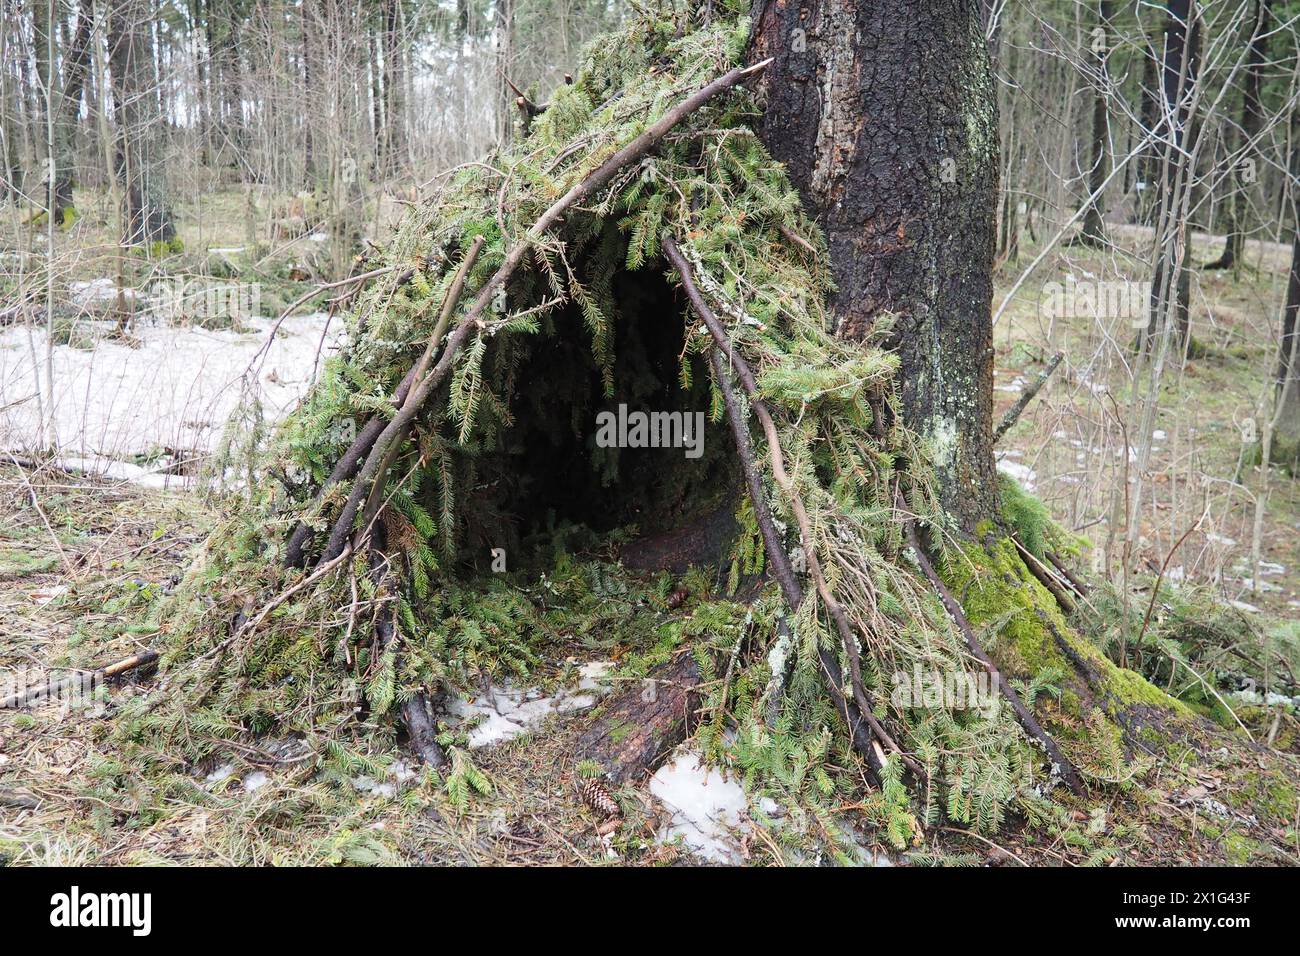 A hut made of spruce branches in the Karelian forest. A hut is the simplest light shelter. It is a structure made using weaving technologies from pole Stock Photo